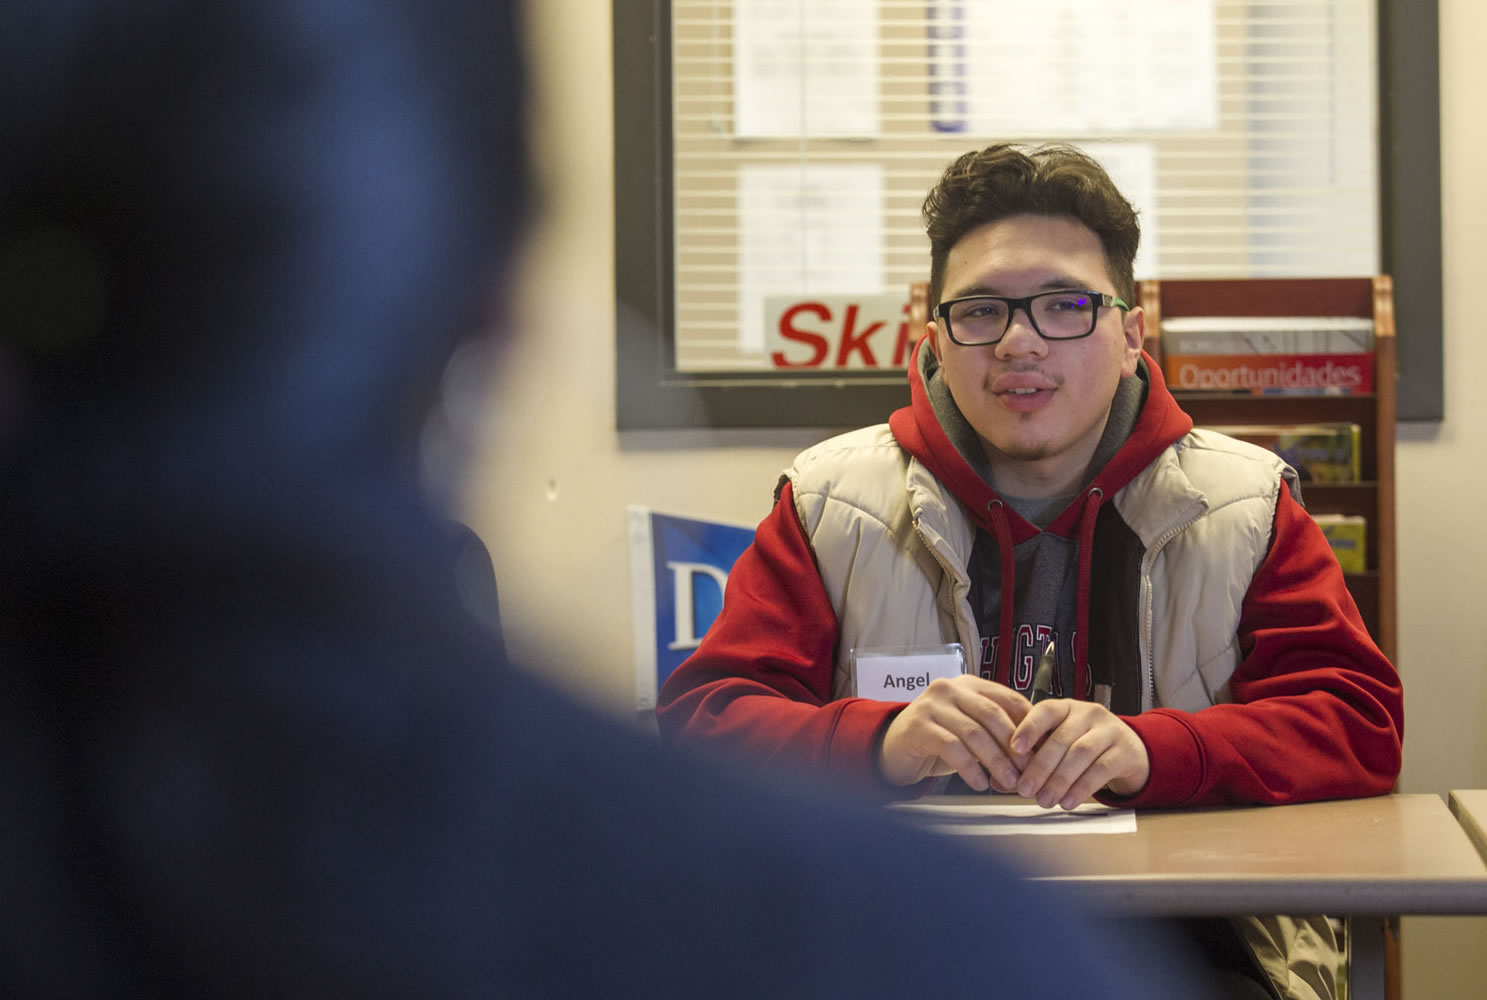 &quot;I like Fort Vancouver because of the amount of diversity,&quot; Fort Vancouver High School student Angel Bonilla said Tuesday.